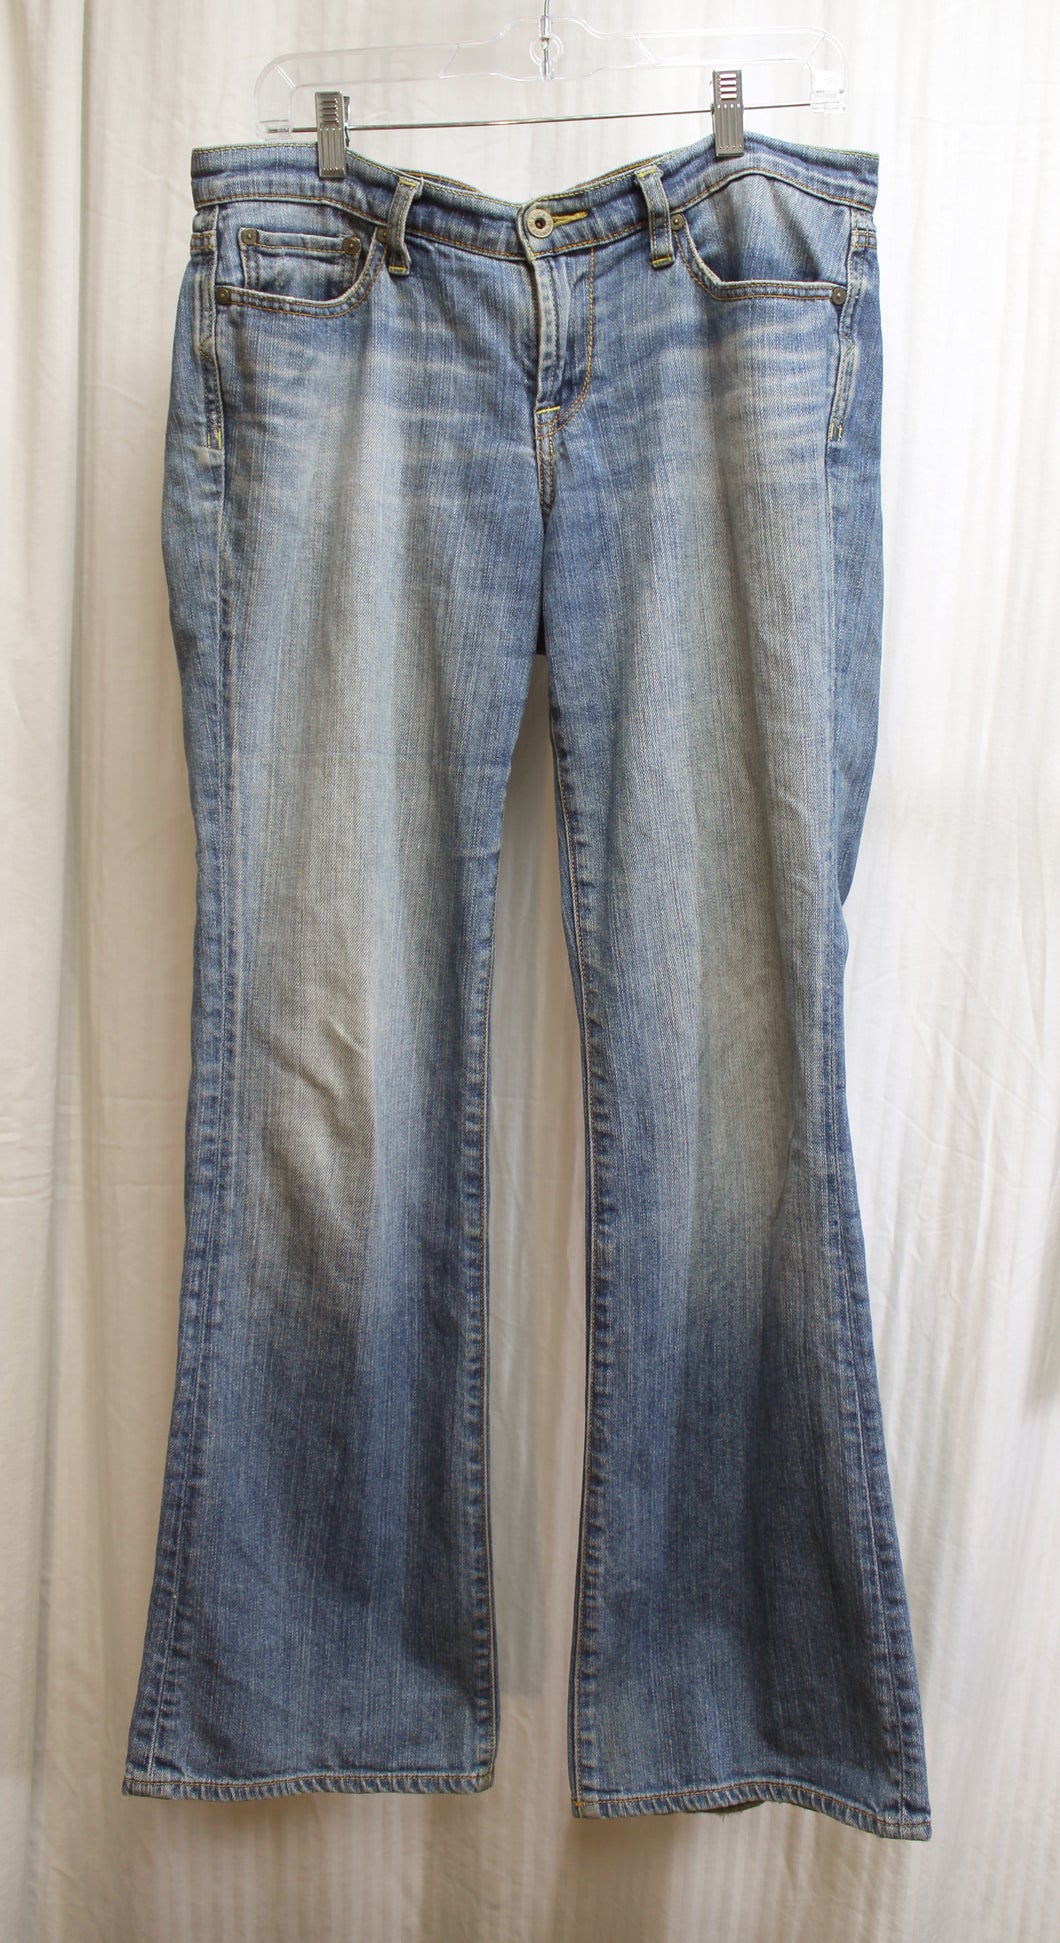 Lucky Brand - Sweet & Low Boot Cut Medium Wash Jeans - Size 8/29